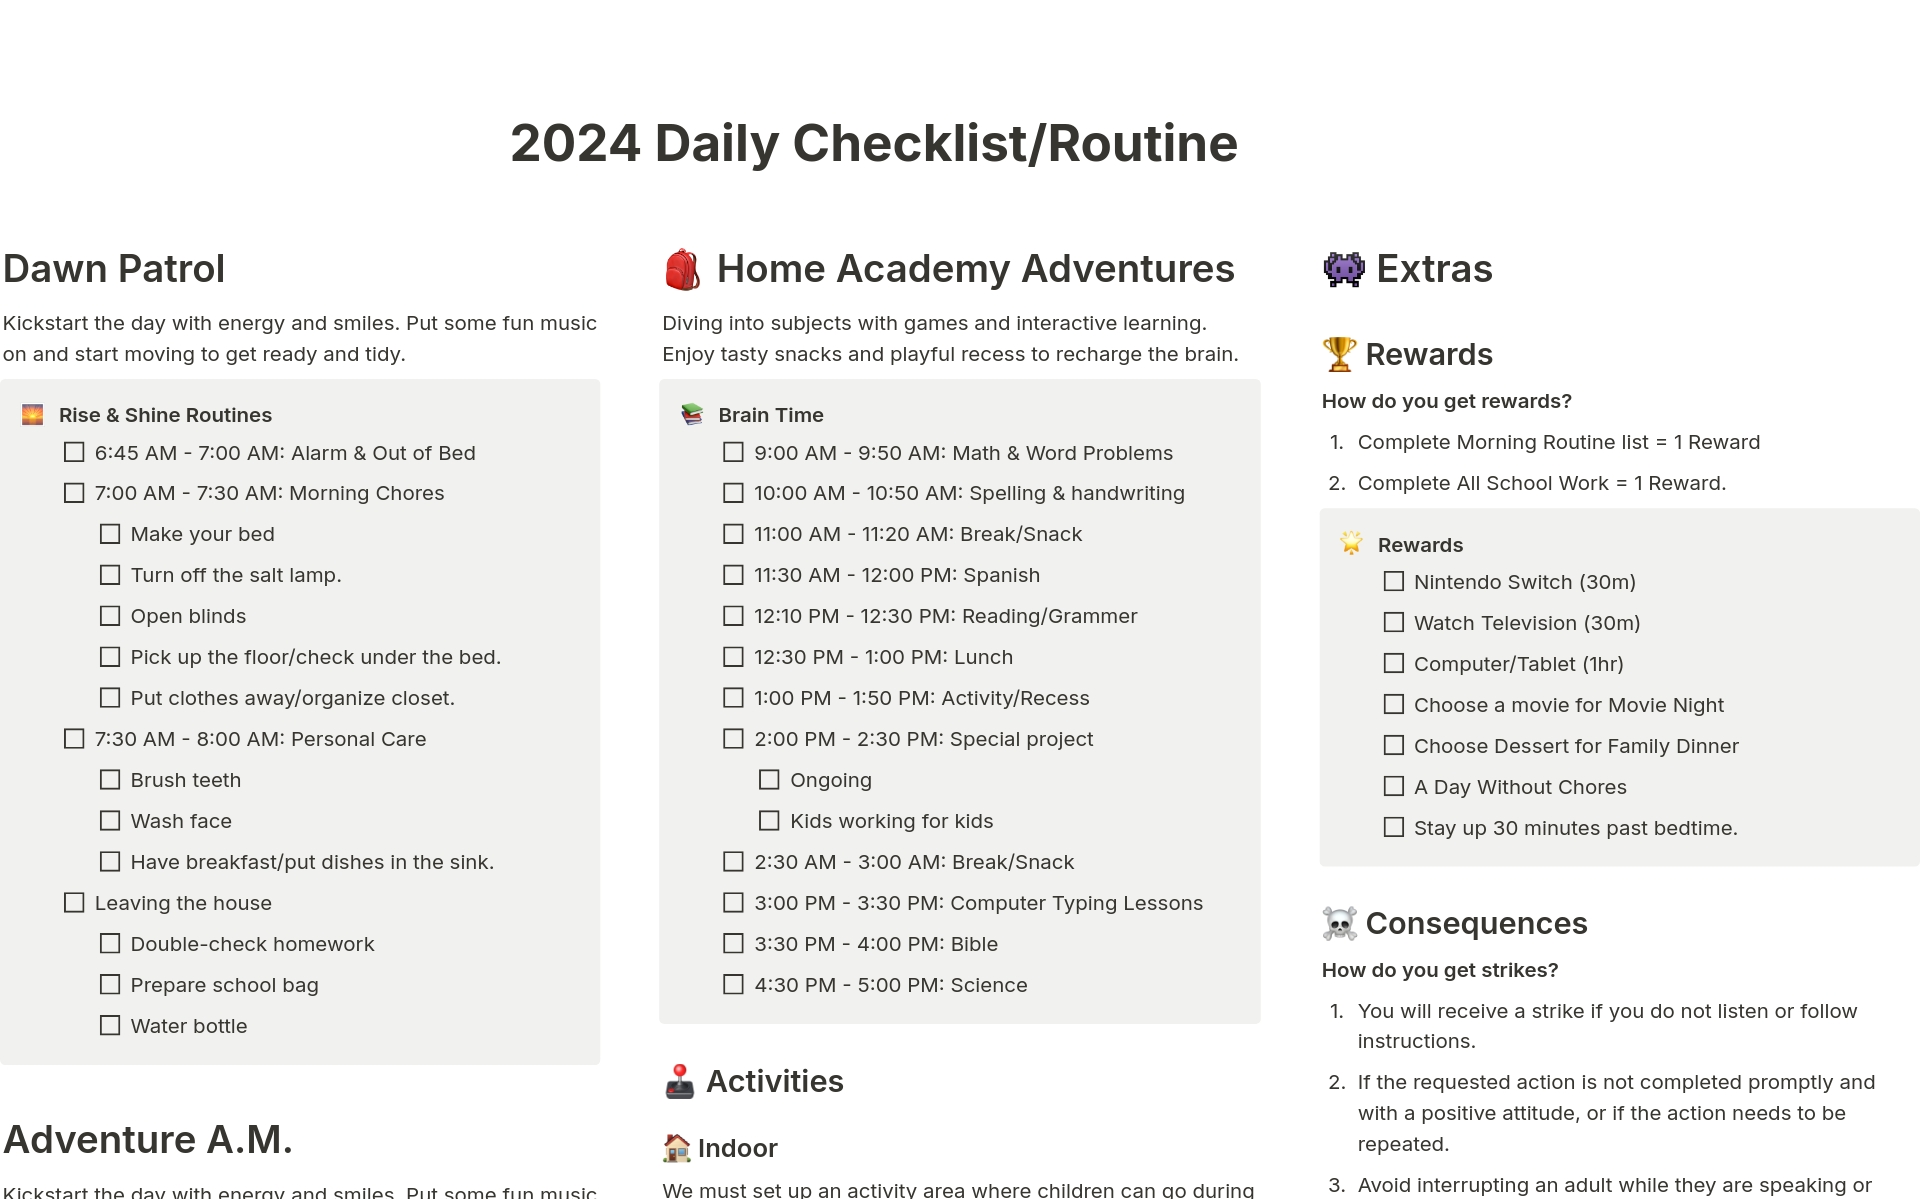 Use this refined daily checklist to establish a reliable routine for your kids. Continuously improved and trusted over time, it adapts as needed. Ideal for homeschooling, it ensures your children stay on track every day.